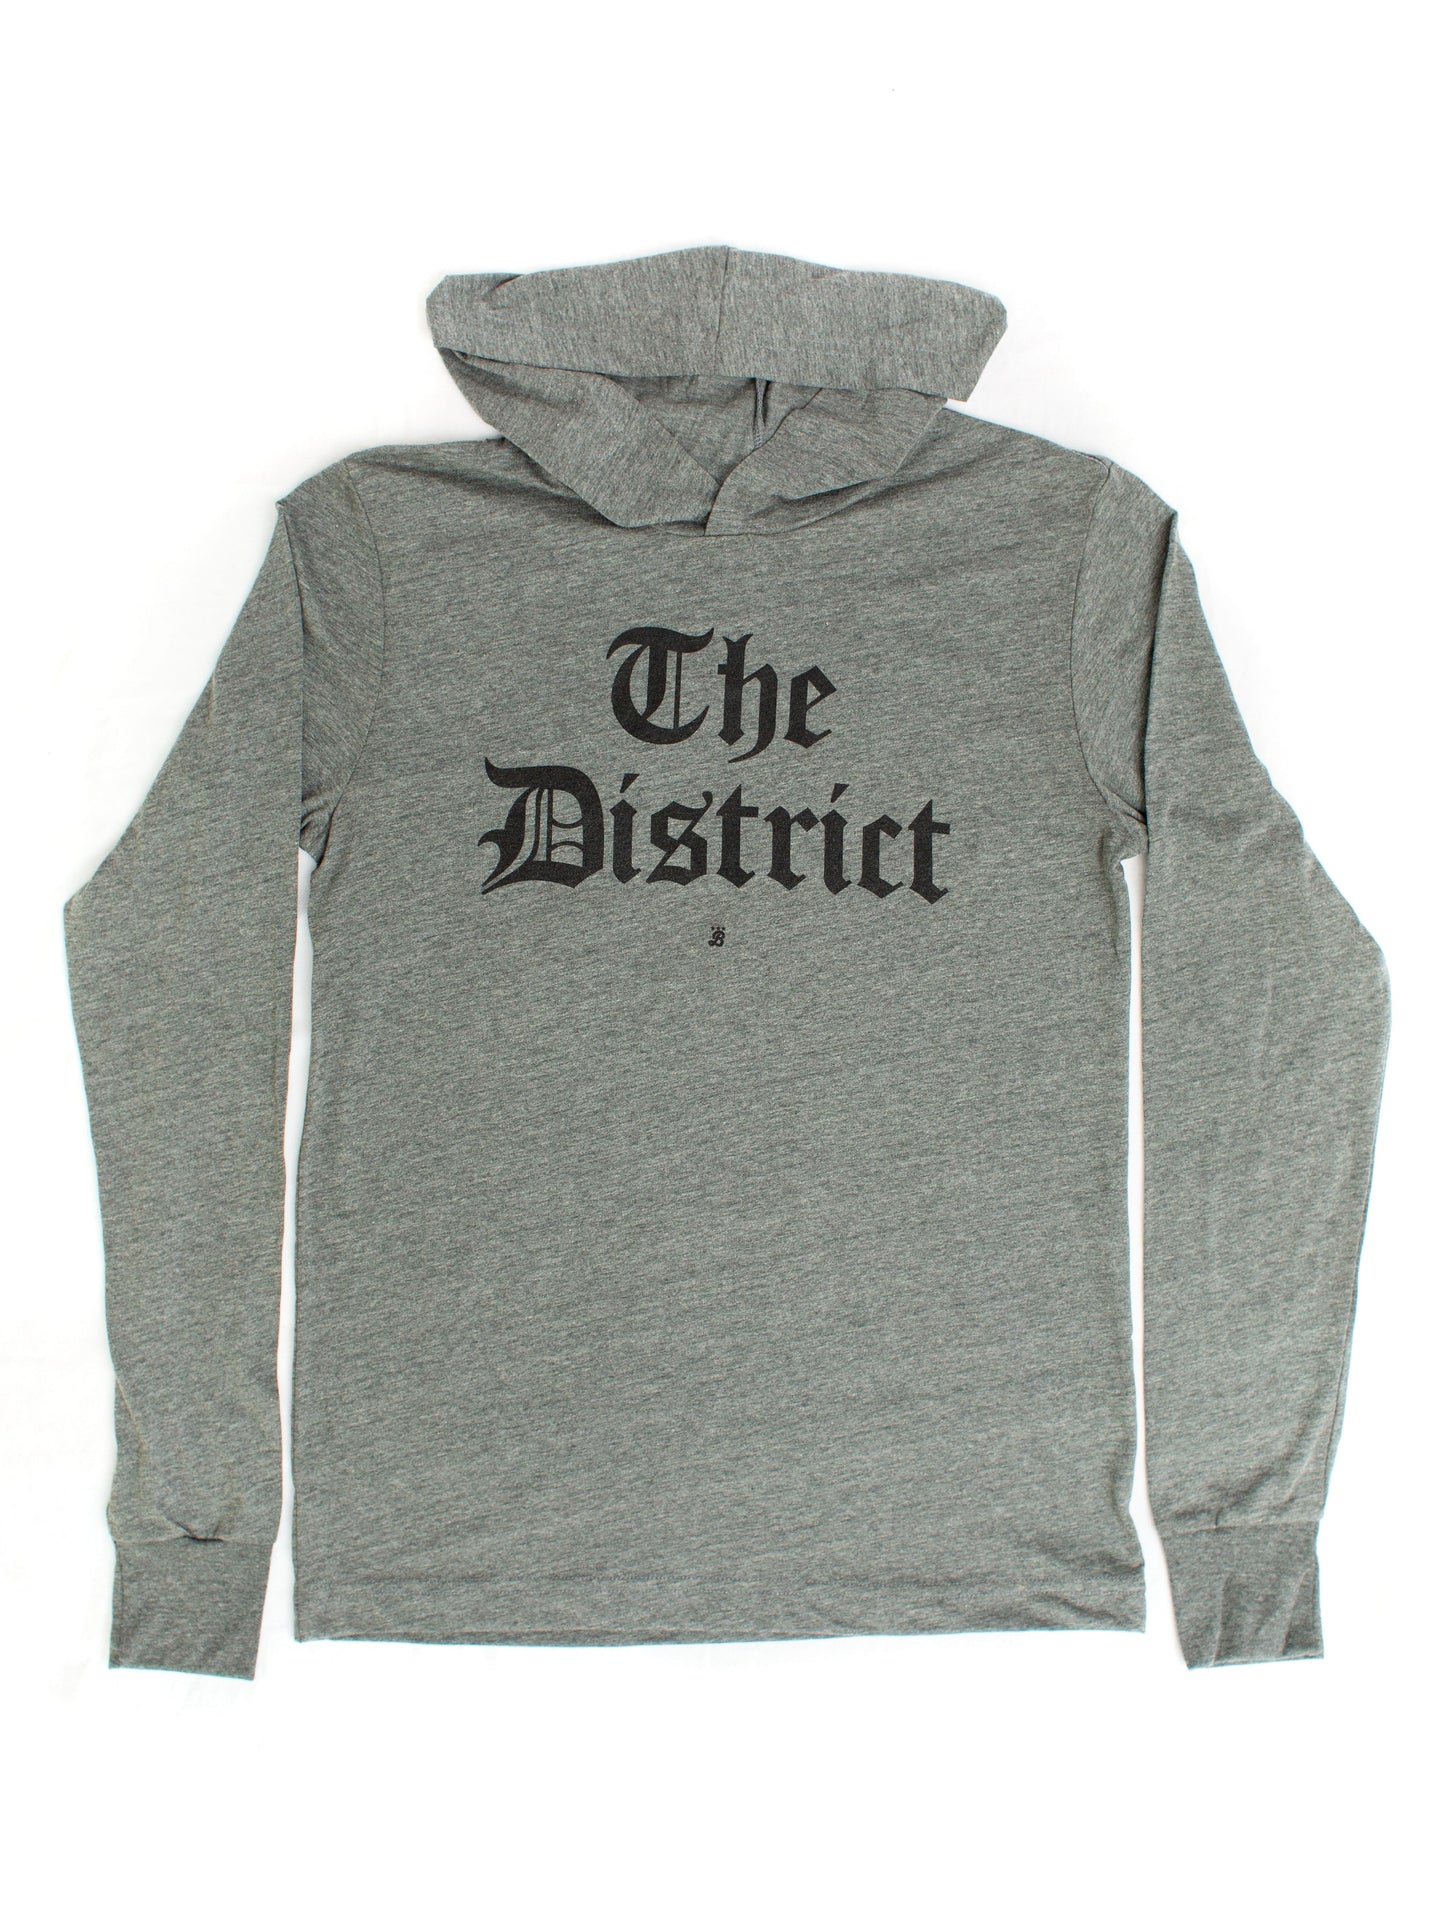 Unisex "The District" Olde English Light Hoodie t-shirt